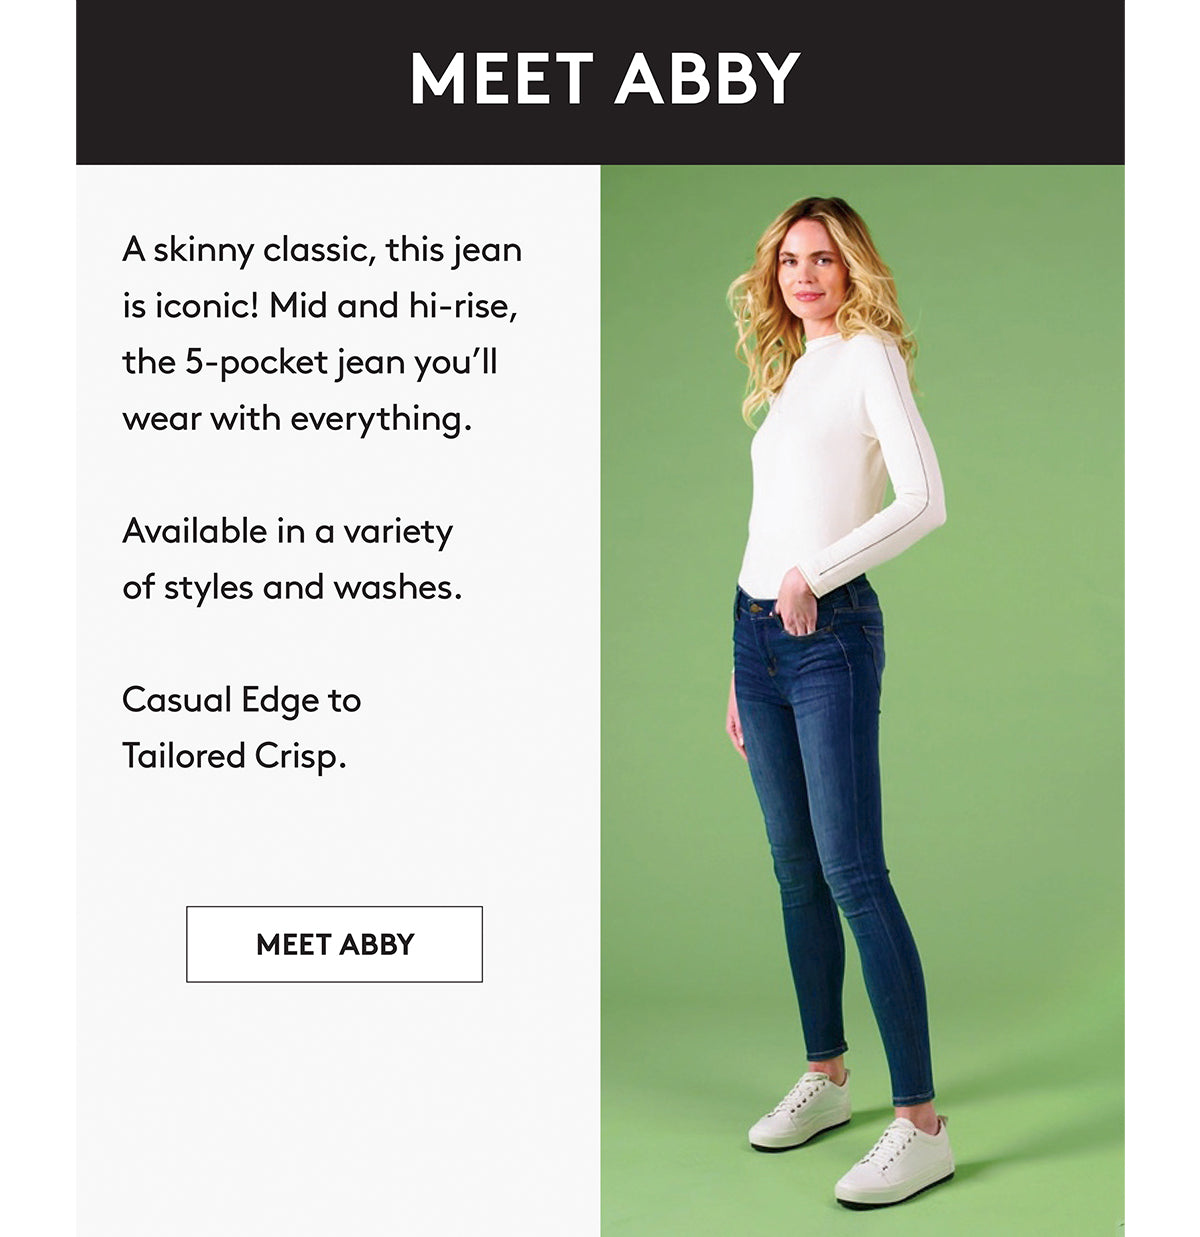 A skinny classic, this jean is iconic! Mid and hi-rise, the 5-pocket jean you'll wear with everything. Available in a variety of styles and washes. Casual Edge to Tailored Crisp. MEET ABBY